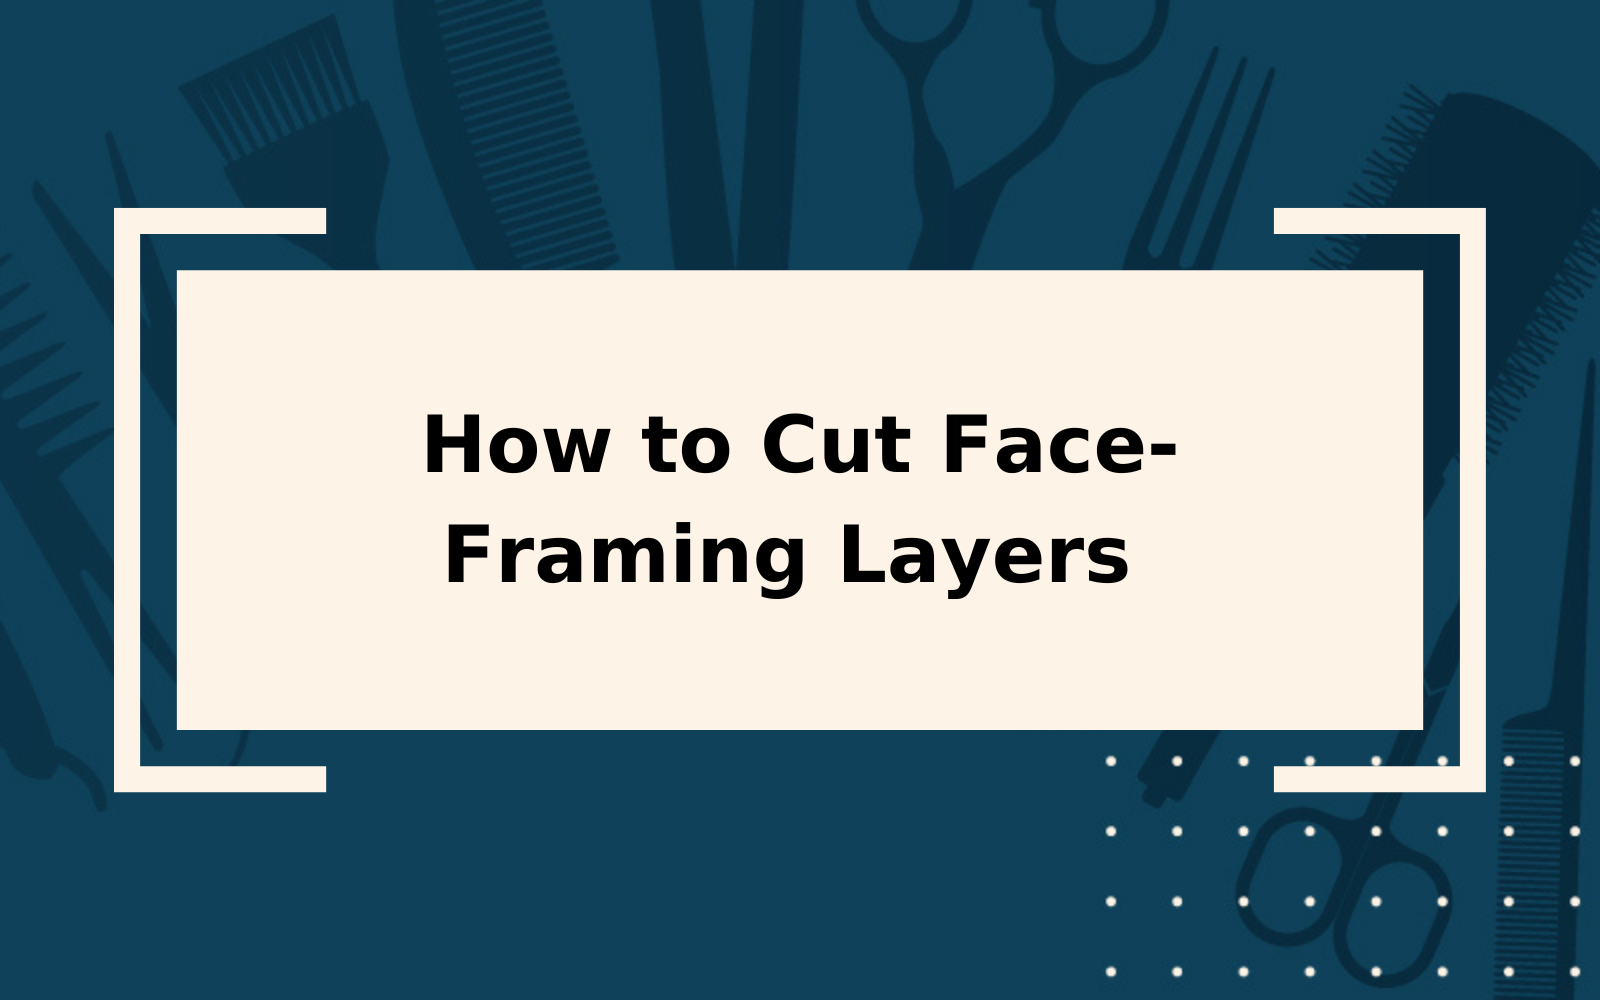 How to Cut Face-Framing Layers | Step-by-Step Guide